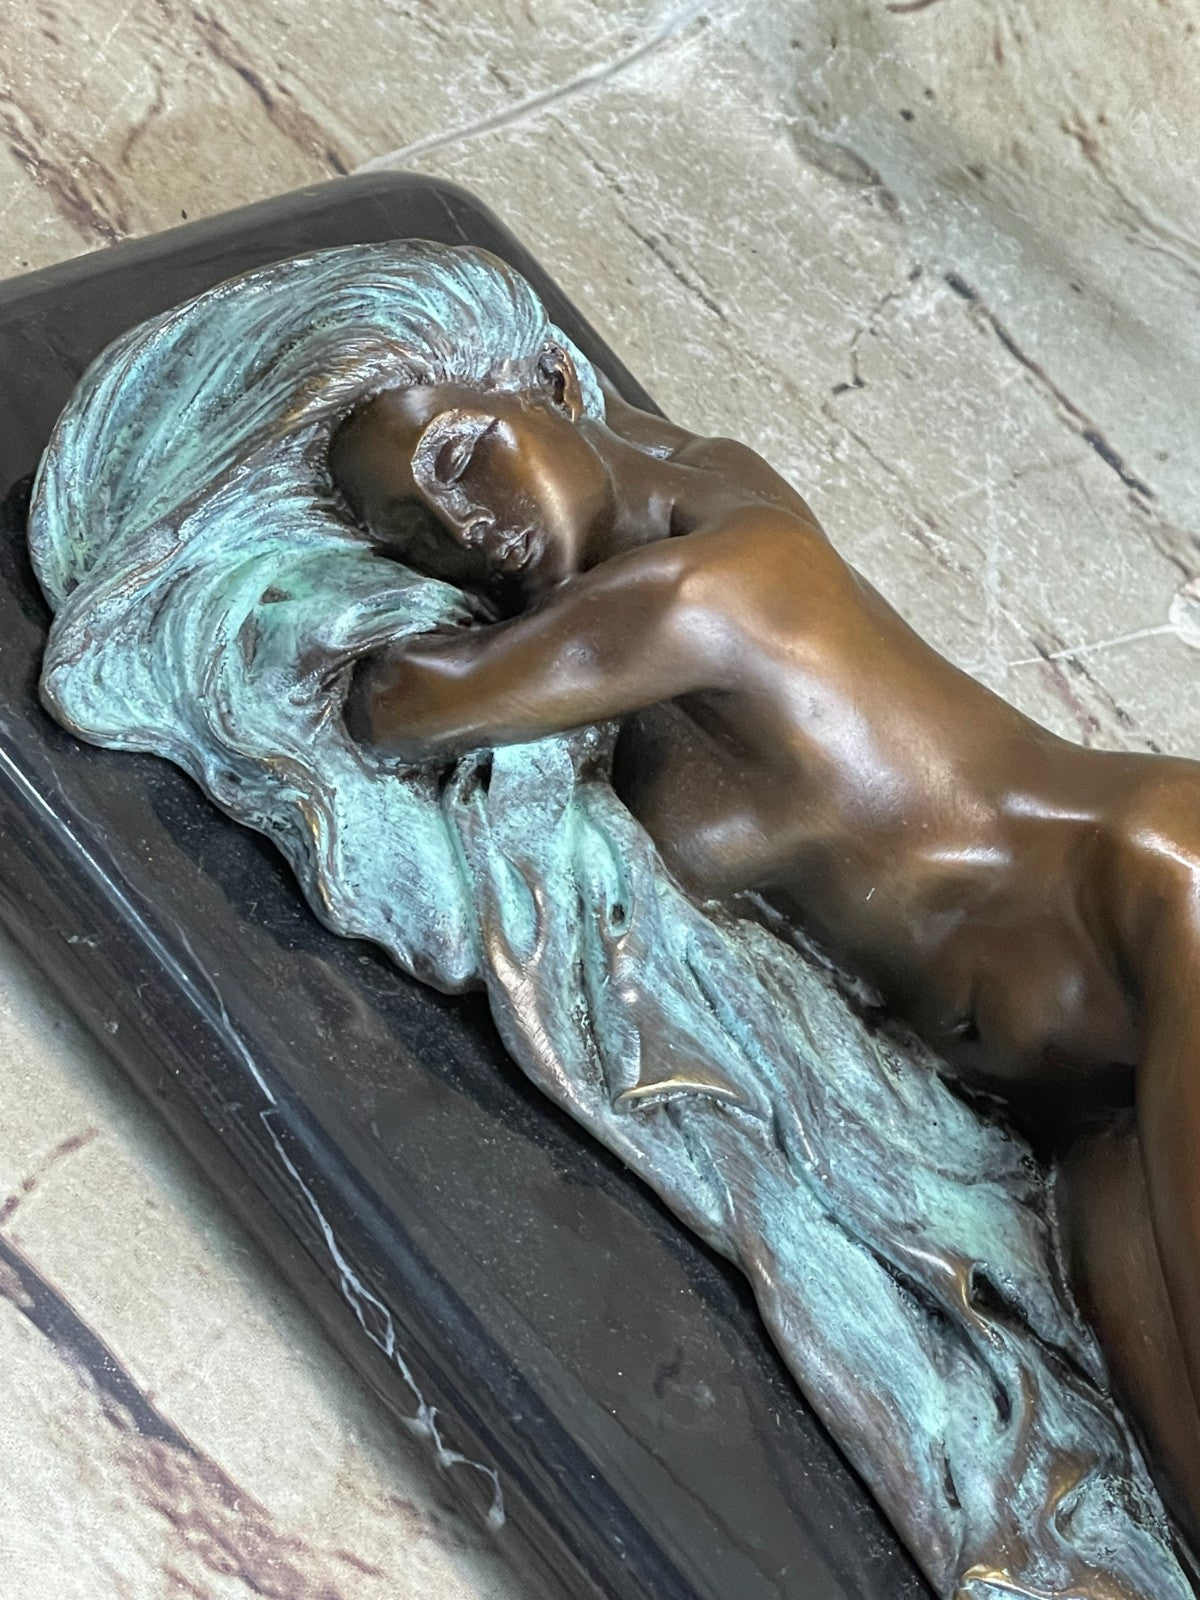 Sexy Girl Naked Hot Women Beautiful Lady Image Babe Bronze Sculpture Statue